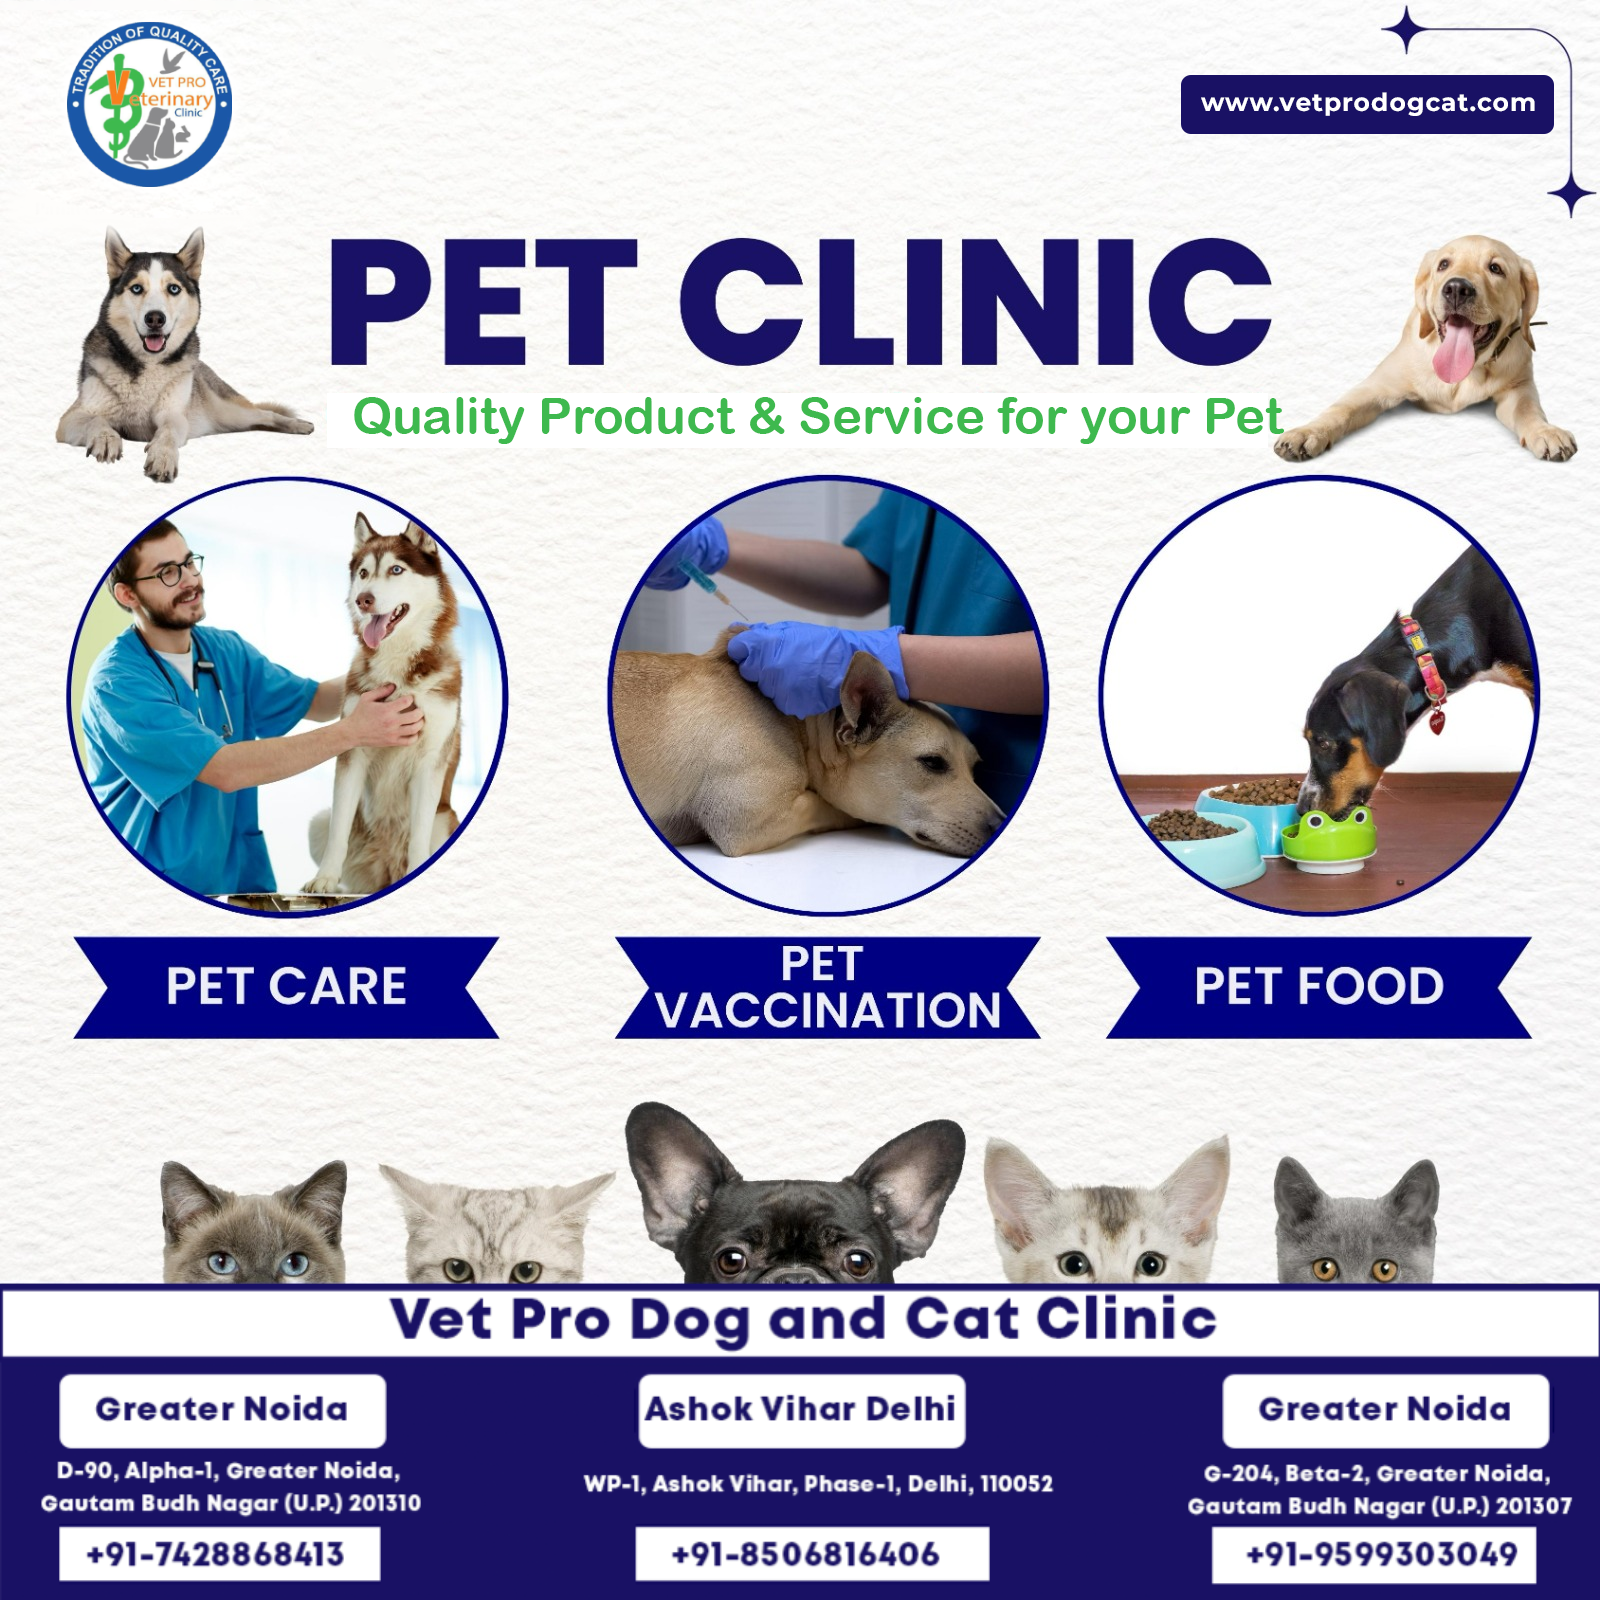 Quality Product and Service for your Pet in Delhi